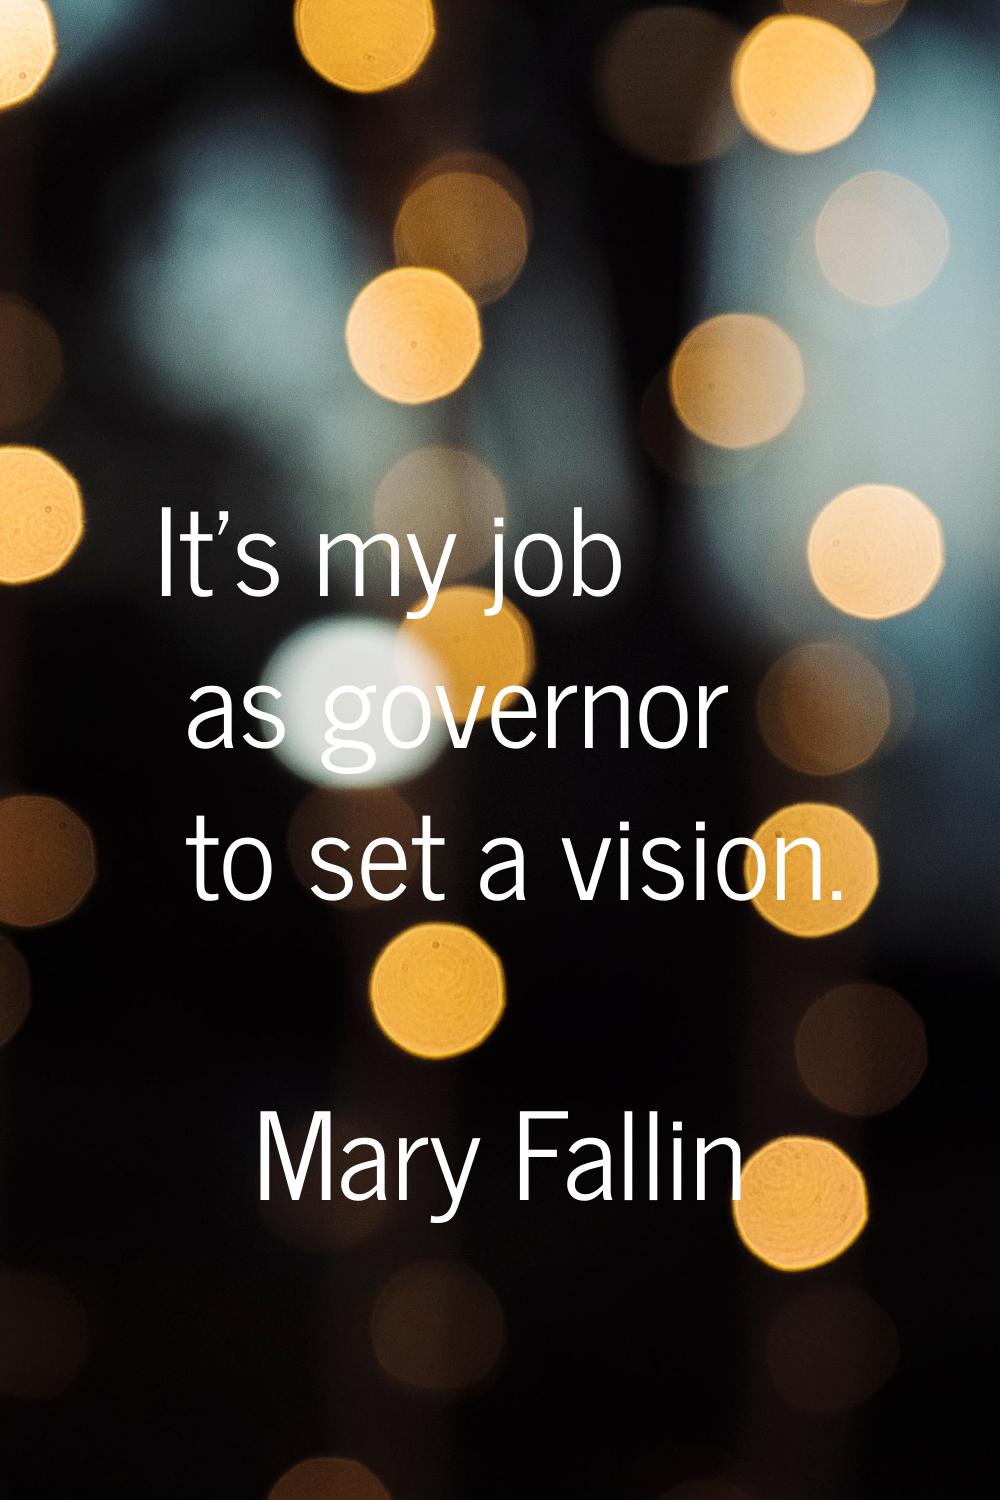 It's my job as governor to set a vision.